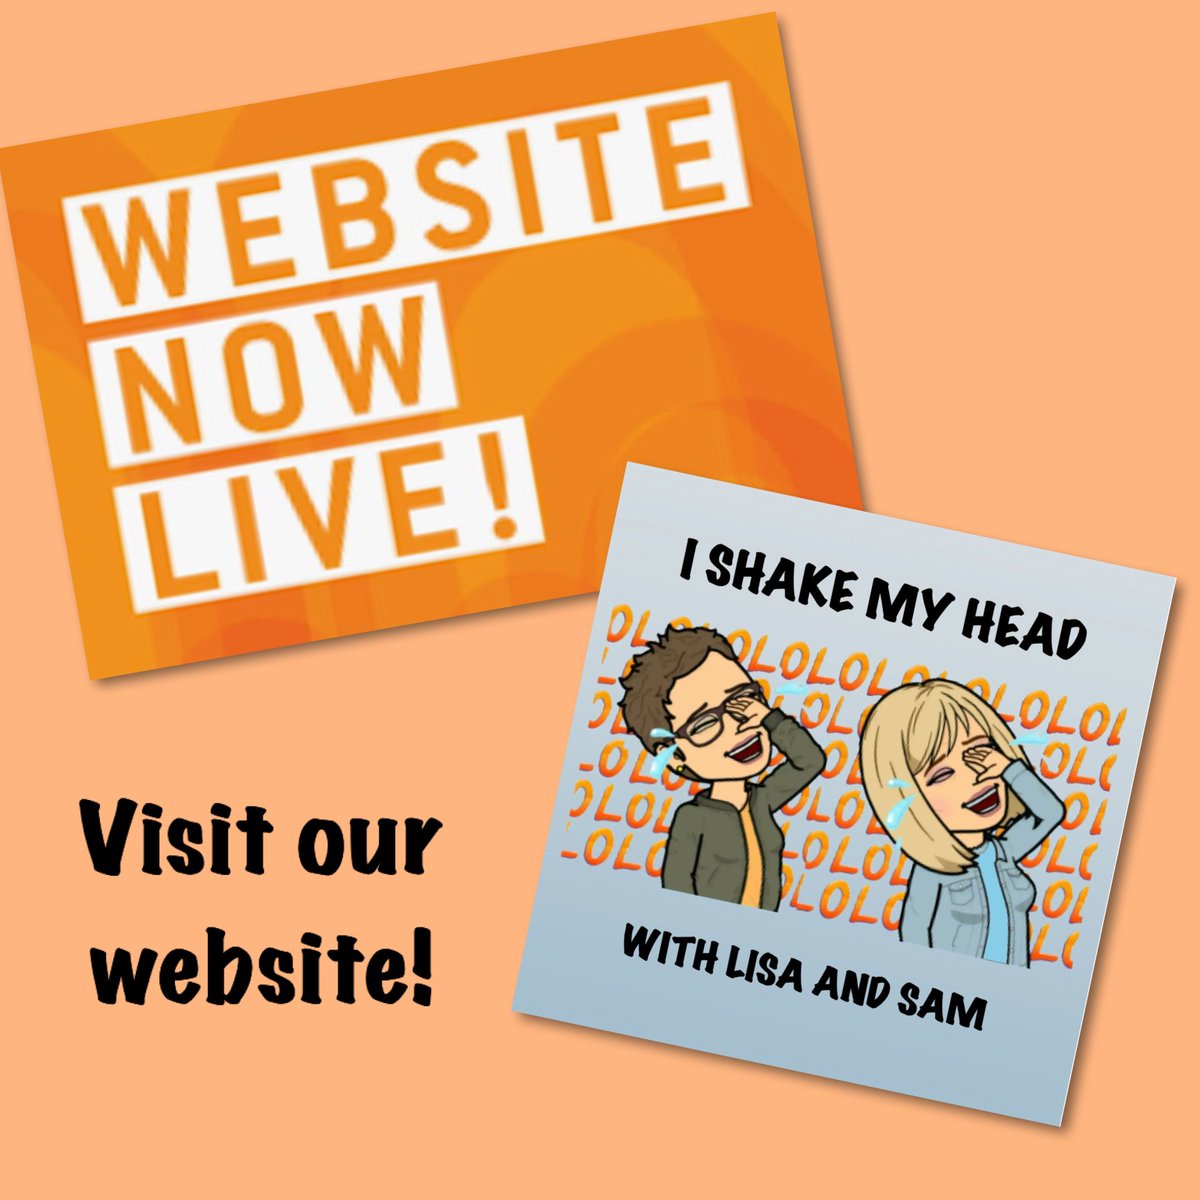 After 7 years and got a website! Friends of the podcast, we now have one stop listening at ishakemyheadpod.com 
Sign up for emails, yep we’re going to be sending you fun things, leave a voice message or review and more! Check it out! #podcast #newwebsite #podcasting #comedy